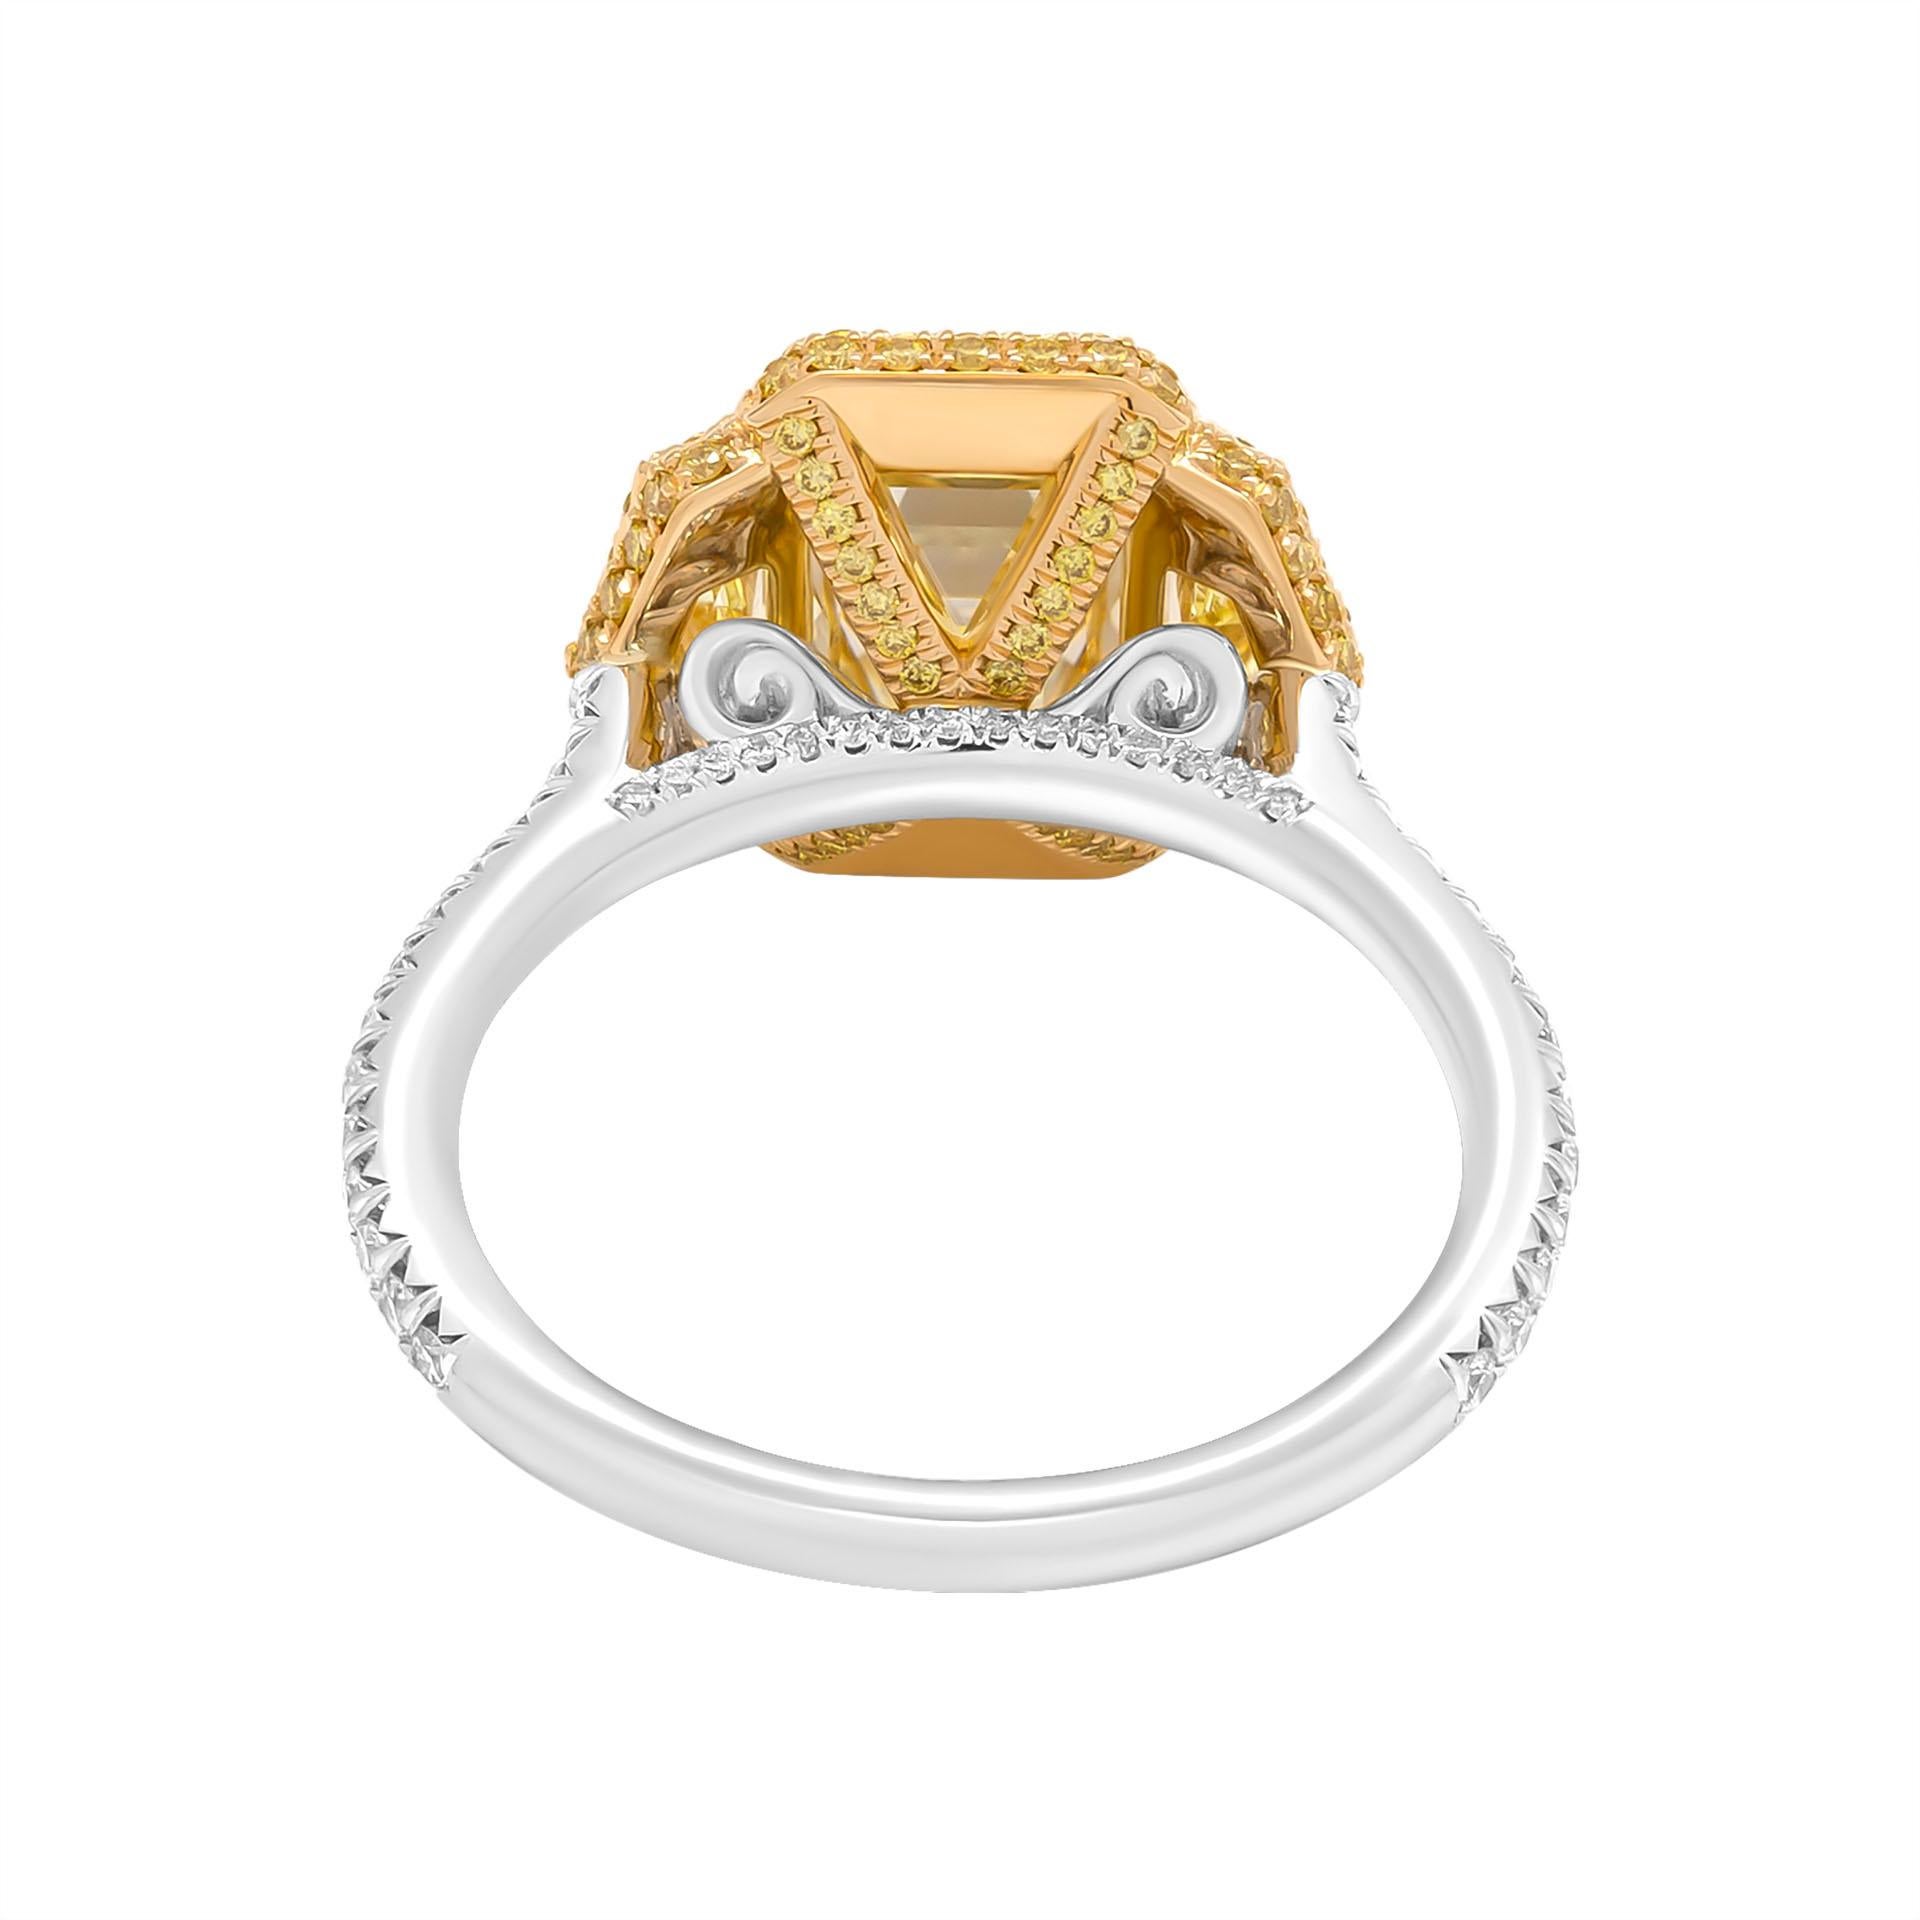 Modern 3 Stone Ring in Platinum & 18k Yellow Gold Center with 2.01 Carat Emerald Cut For Sale